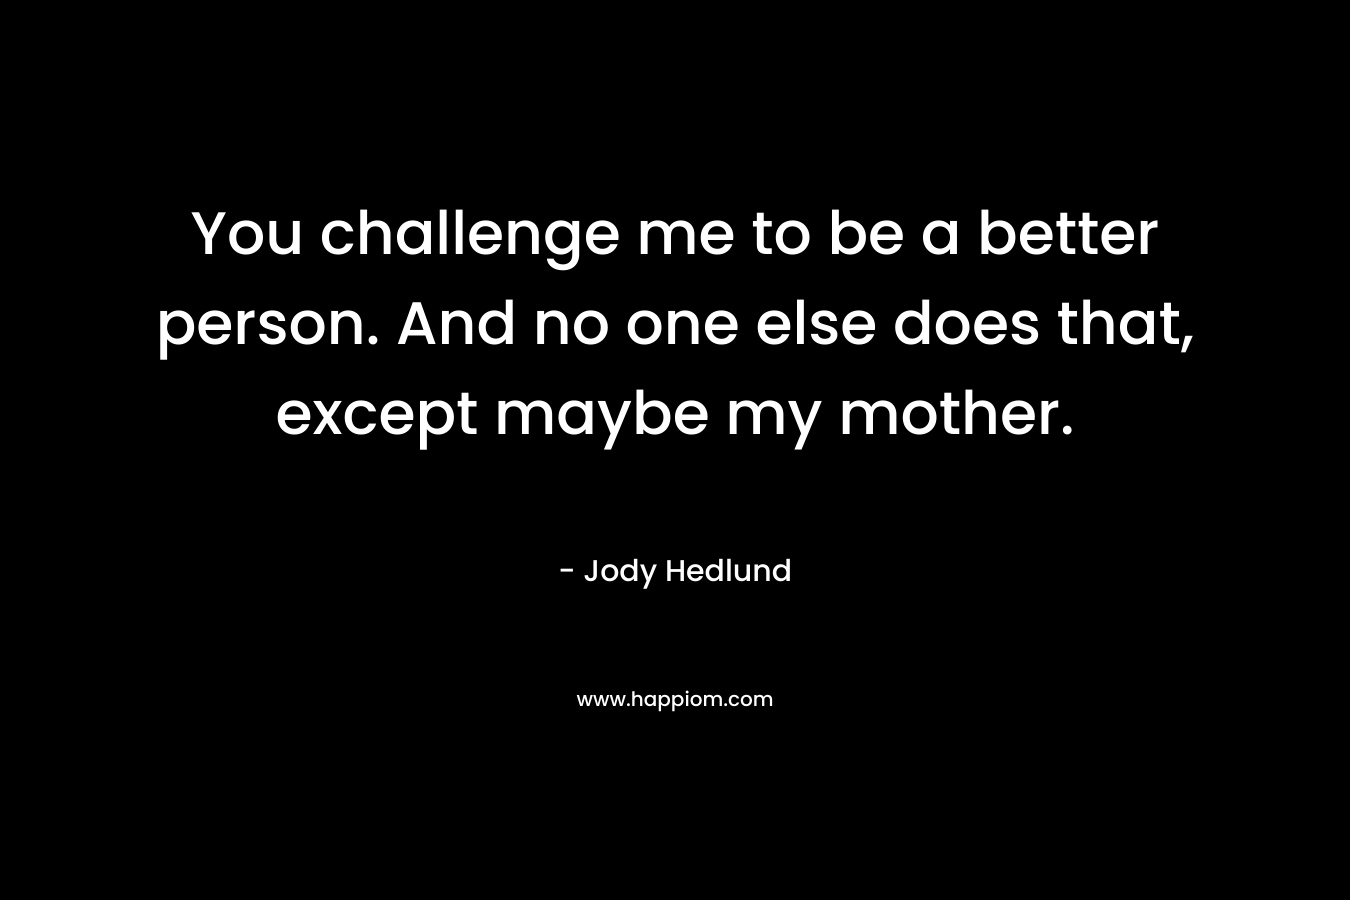 You challenge me to be a better person. And no one else does that, except maybe my mother. – Jody Hedlund